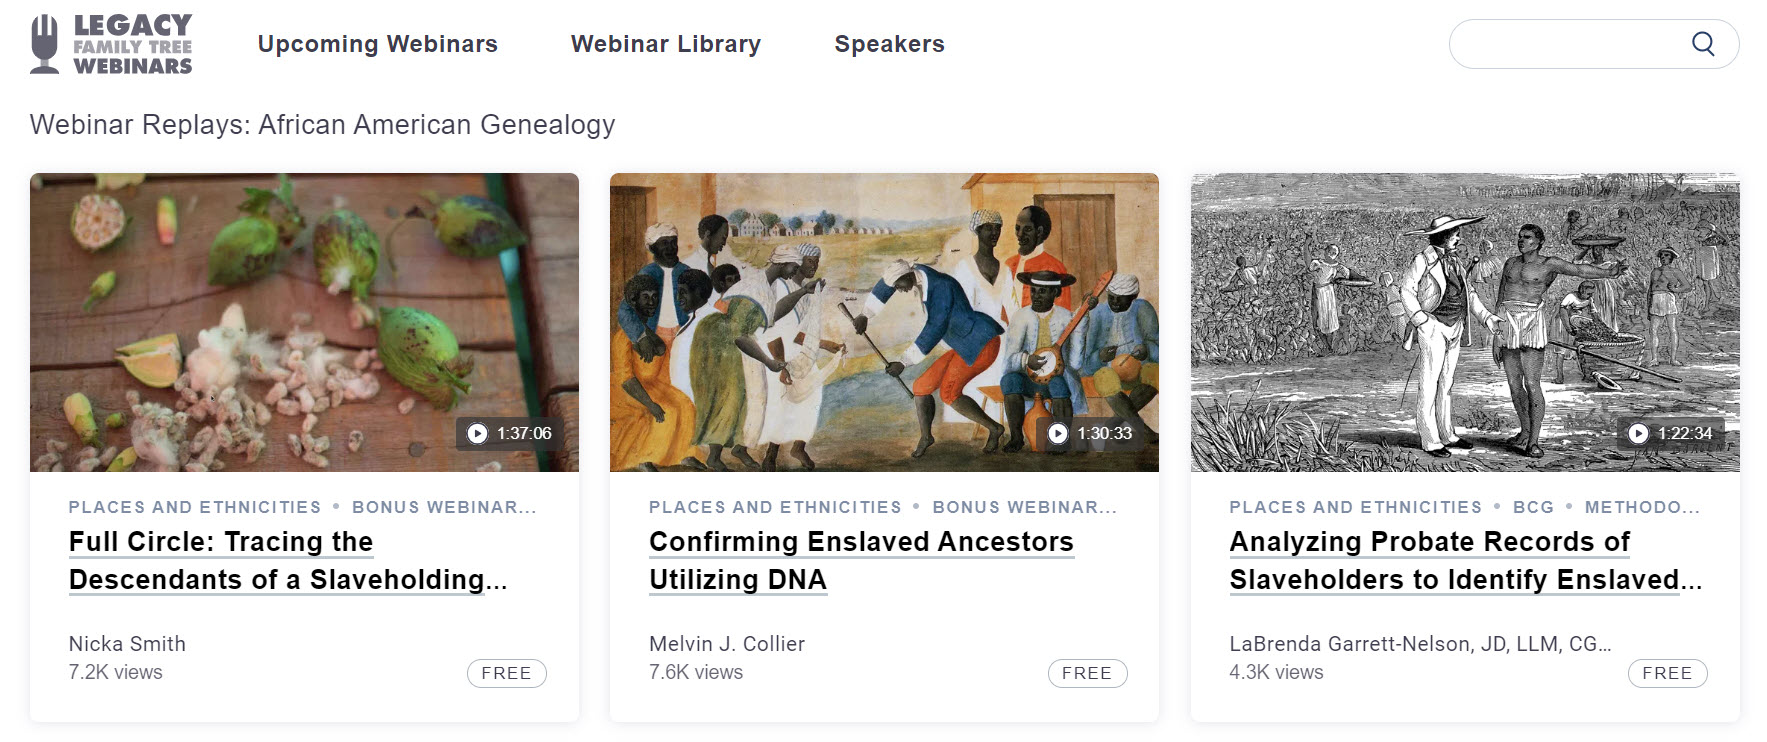 Legacy Family Tree Webinars, in conjunction with the Reuters series Slavery’s Descendants, is making available at no charge a variety of online genealogy webinars from its extensive library to help novices and experts alike. Taught by genealogists from around the world, the webinars below require no registration and are accessible without membership. The webinars range from introductions to genealogy for novices to courses that explore African American genealogy.